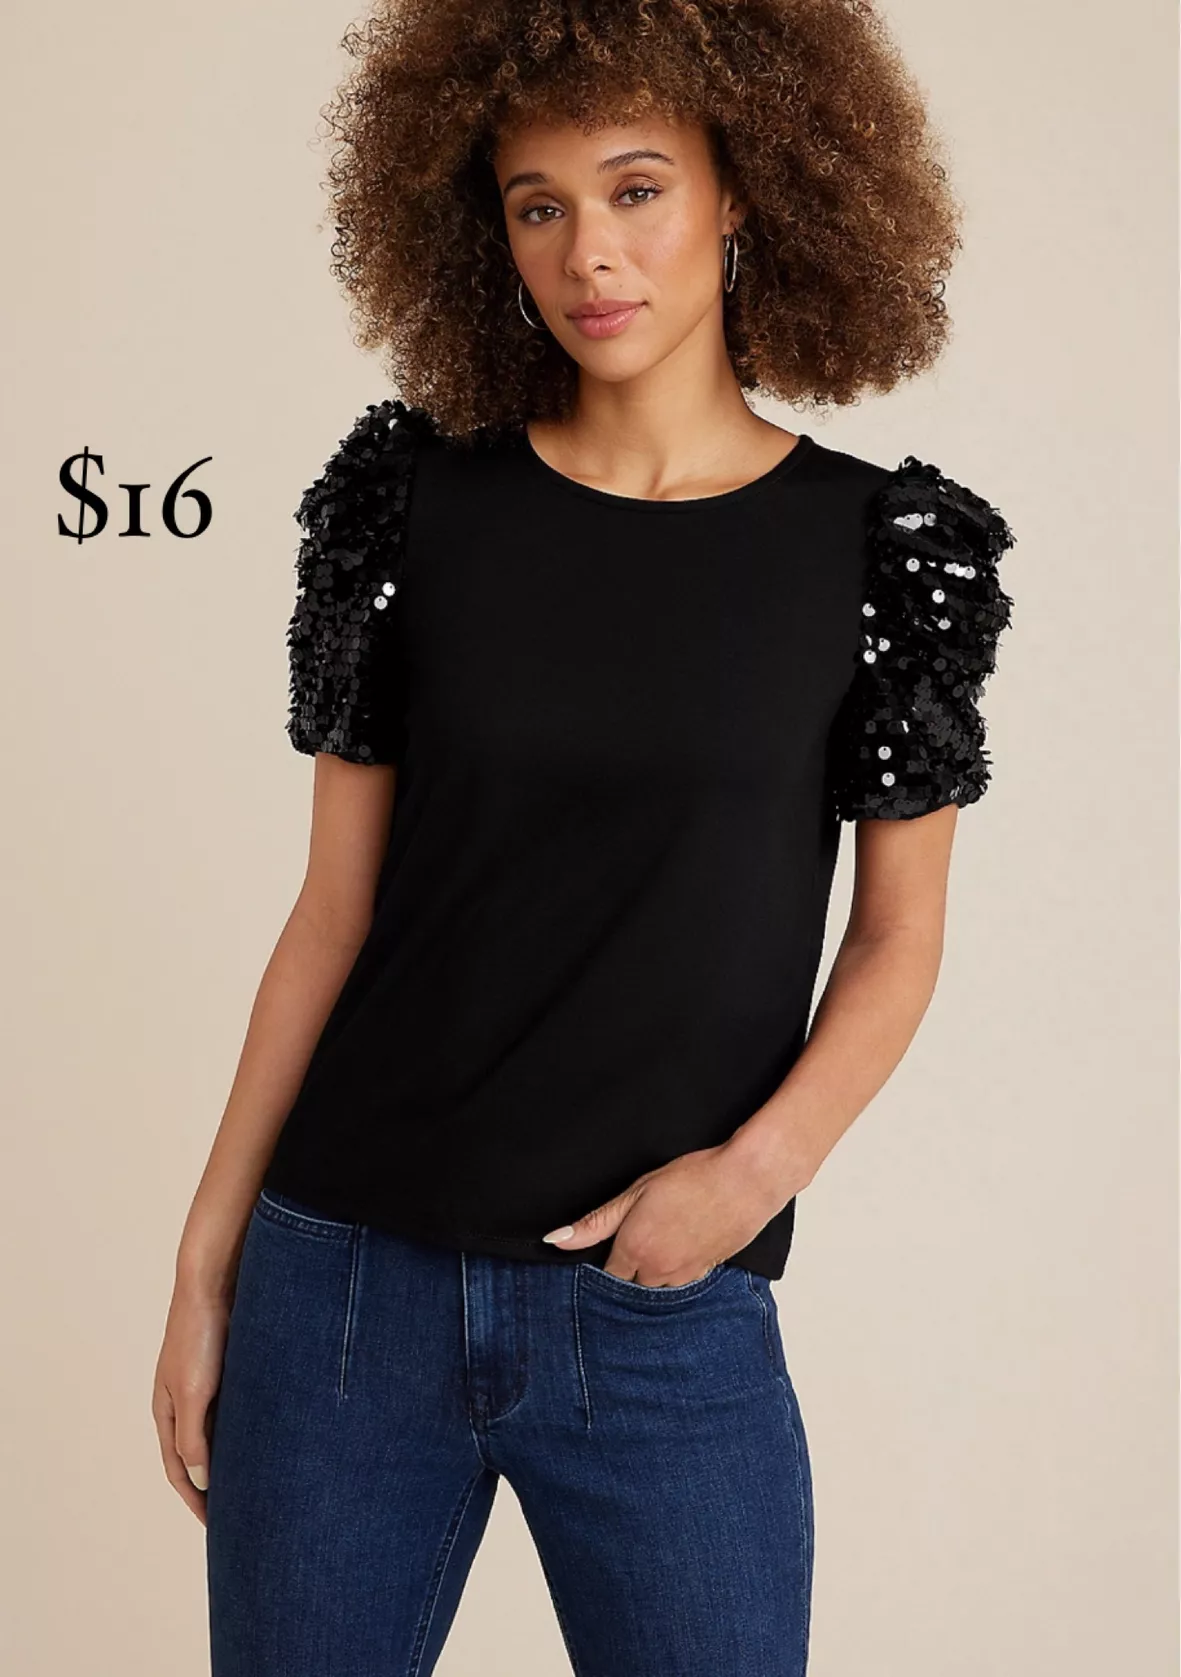 Sequined Blouse curated on LTK